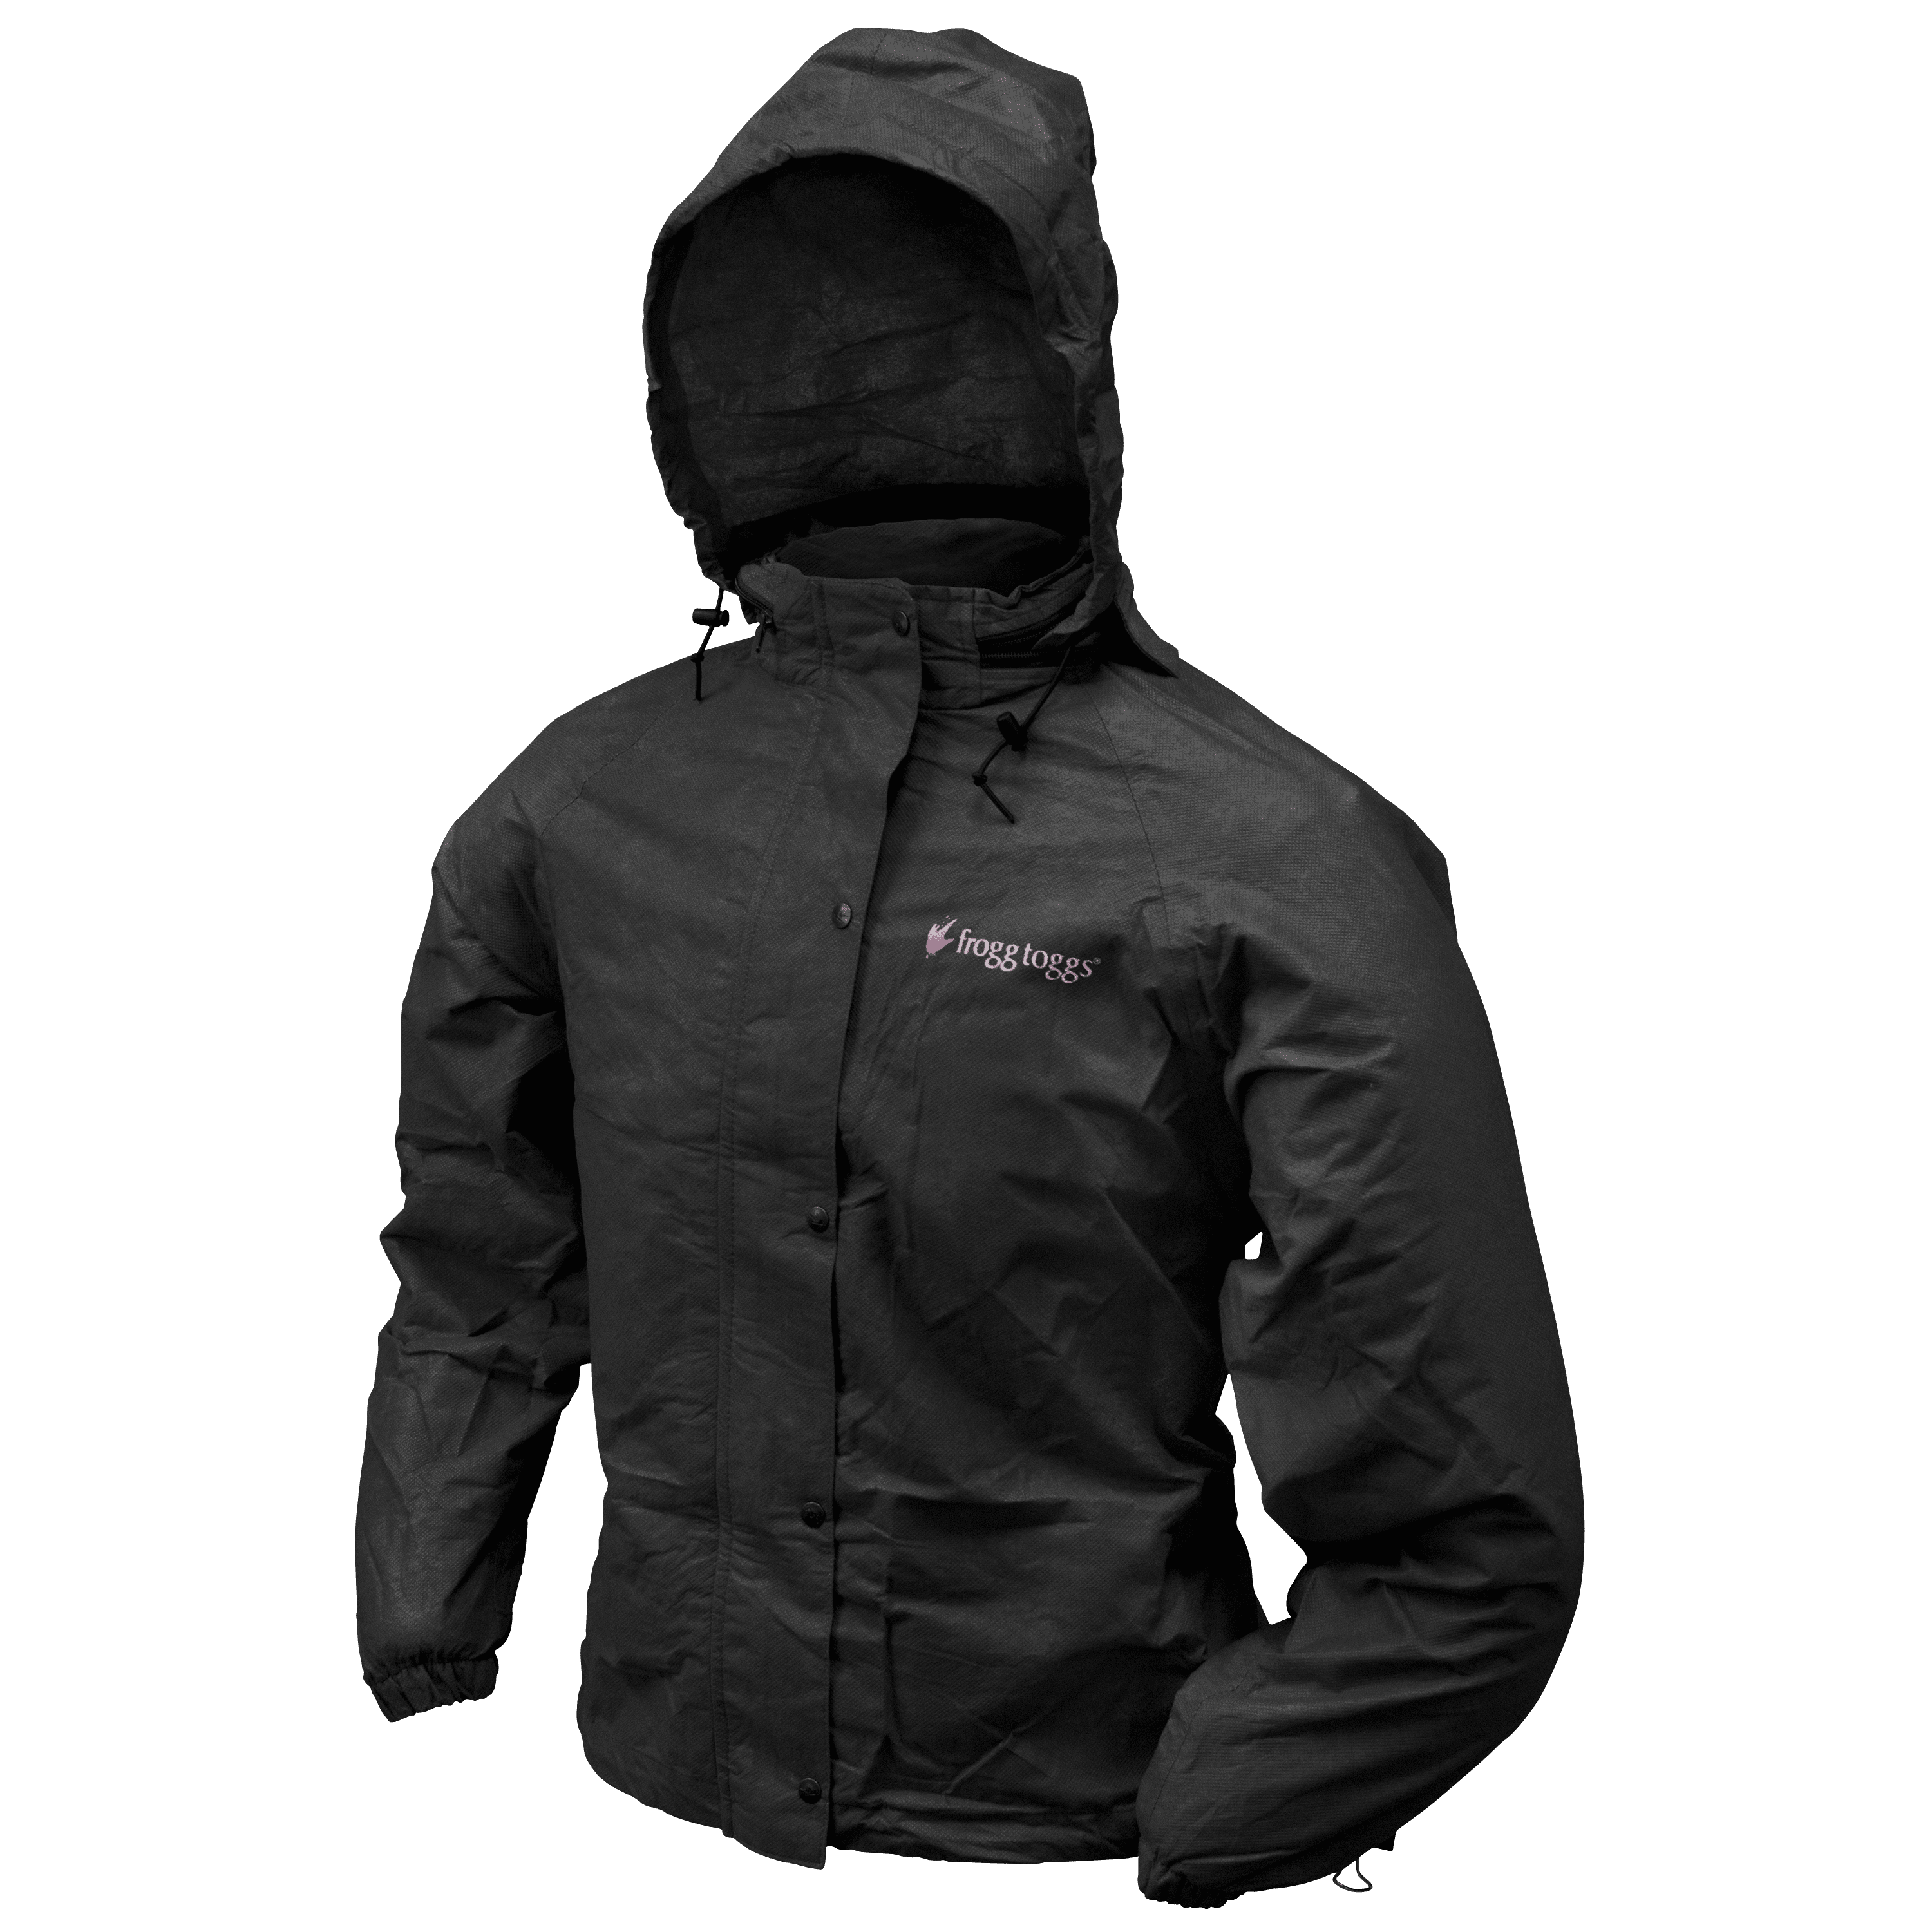 FROGG TOGGS Women's Classic All-Purpose Waterproof Breathable Rain Suit 